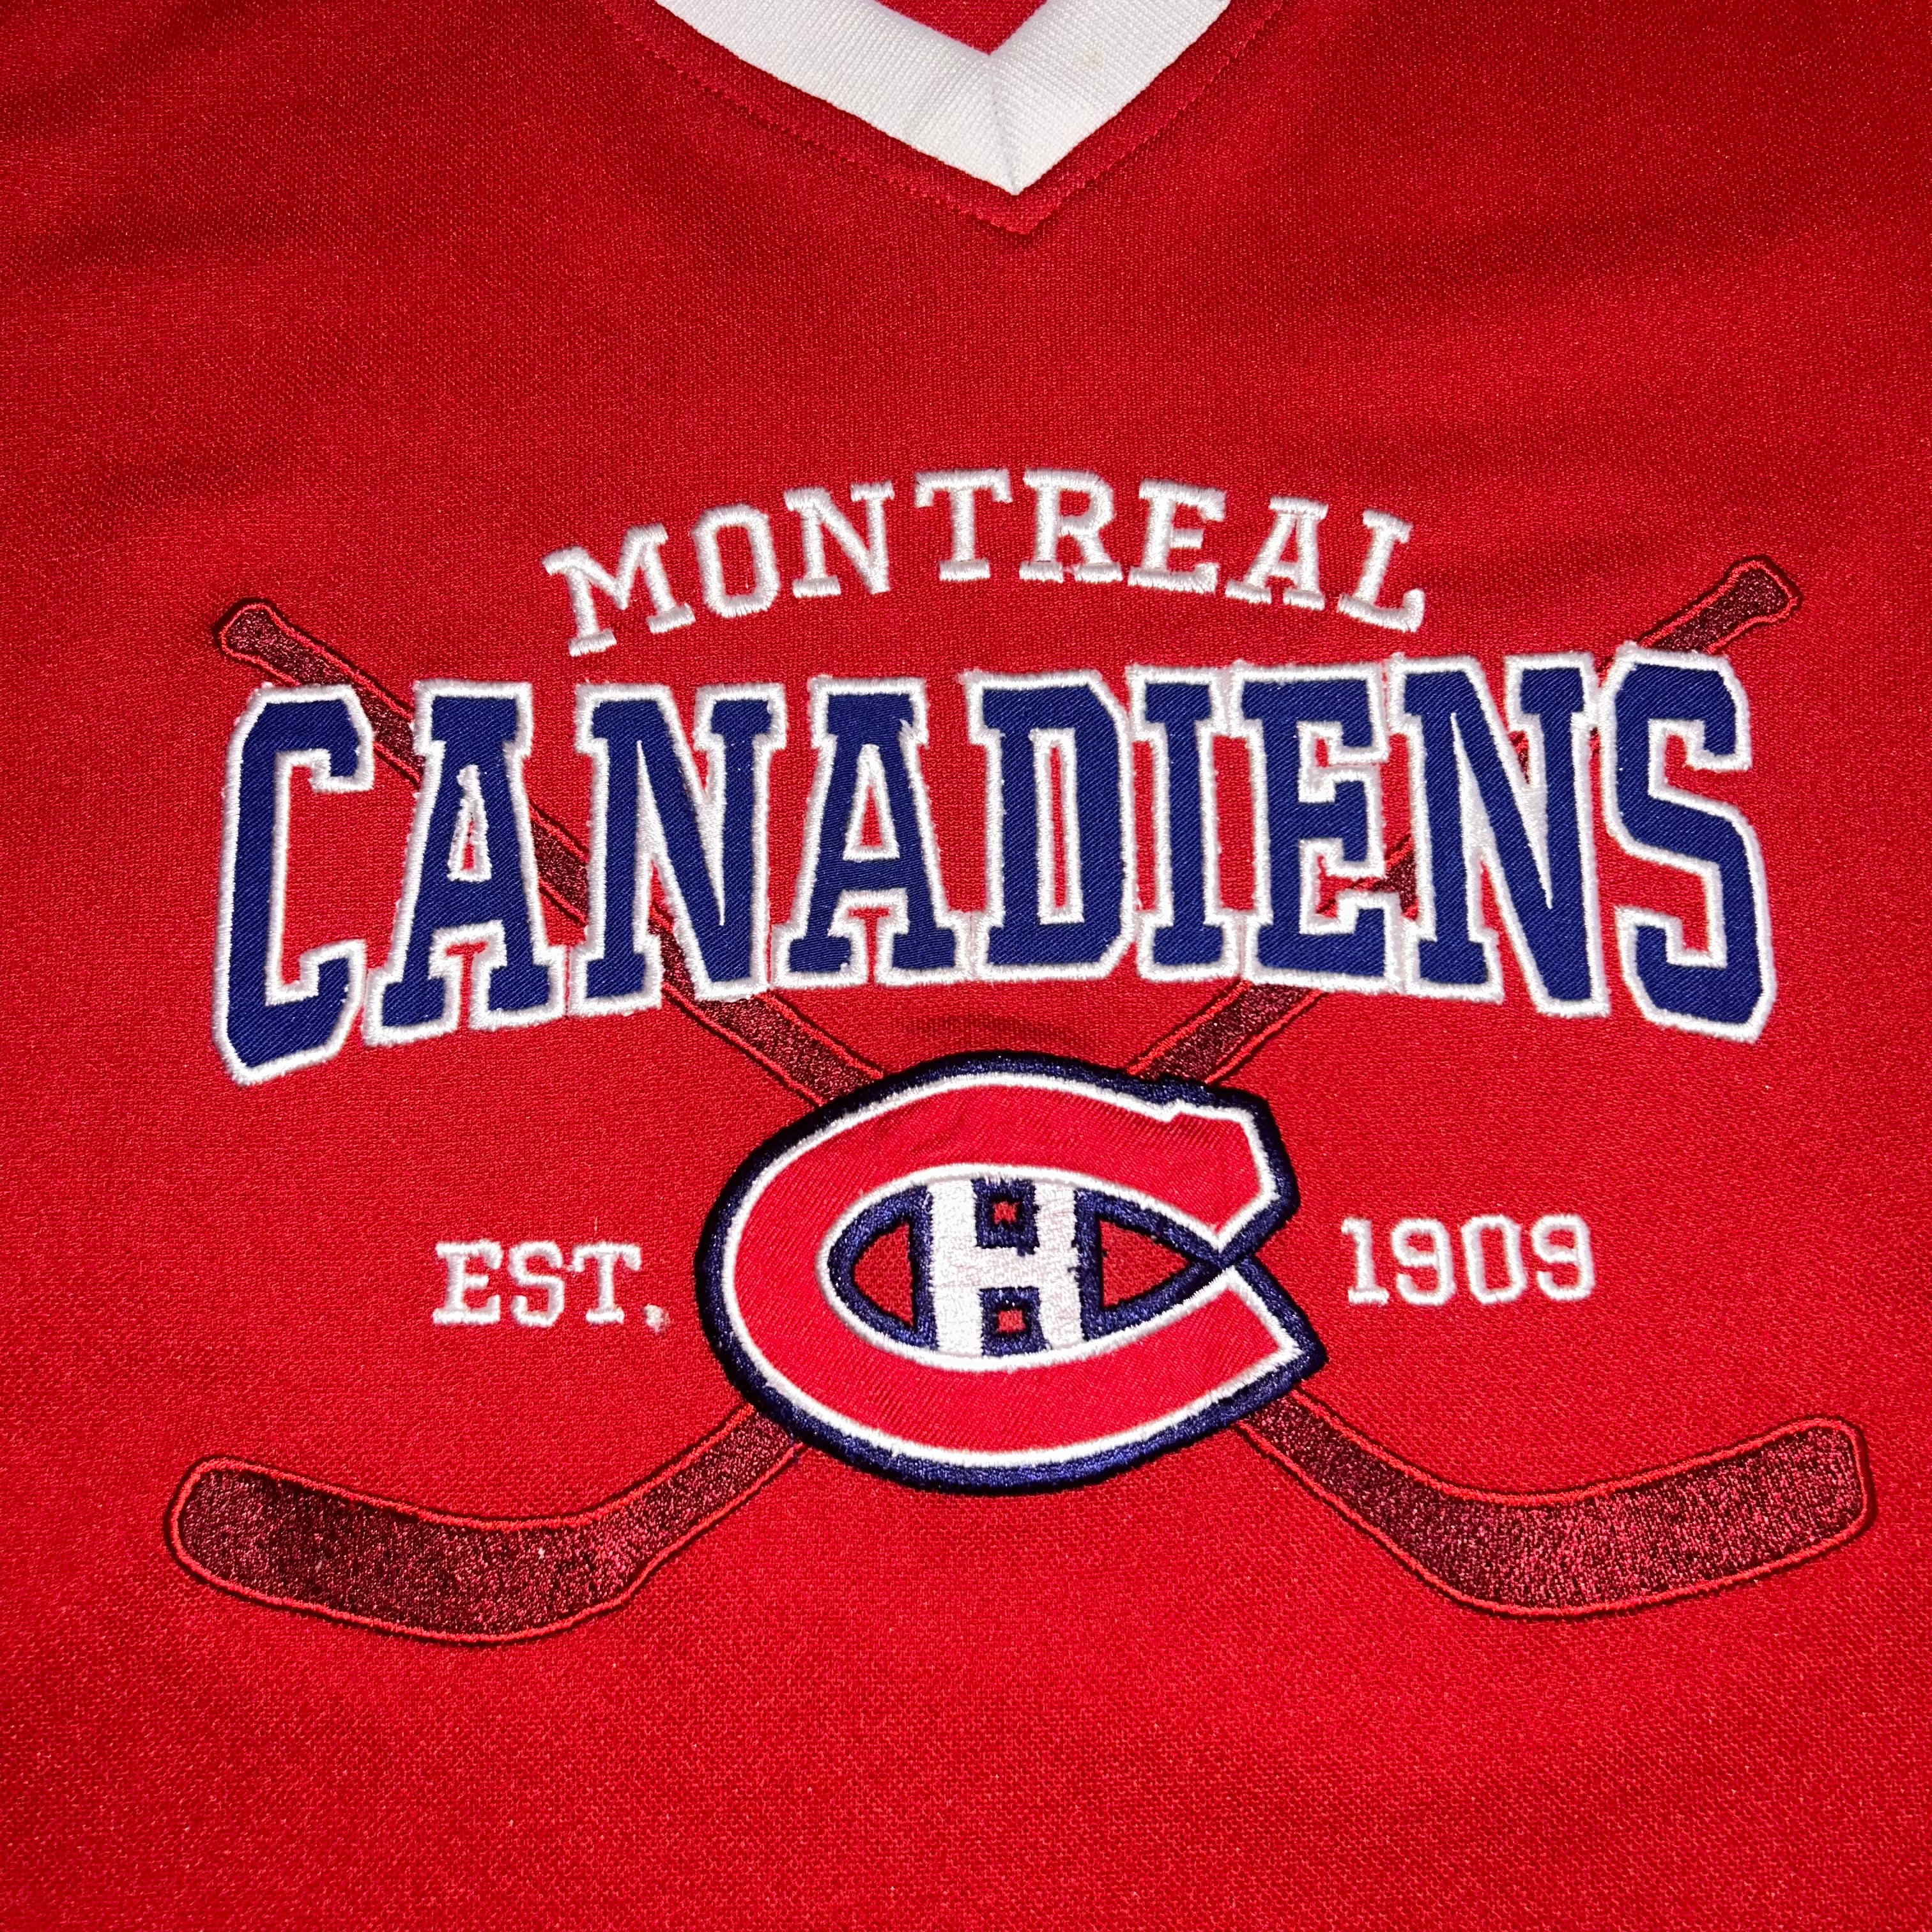 Montreal Canadiens NHL Vintage Jersey (S)